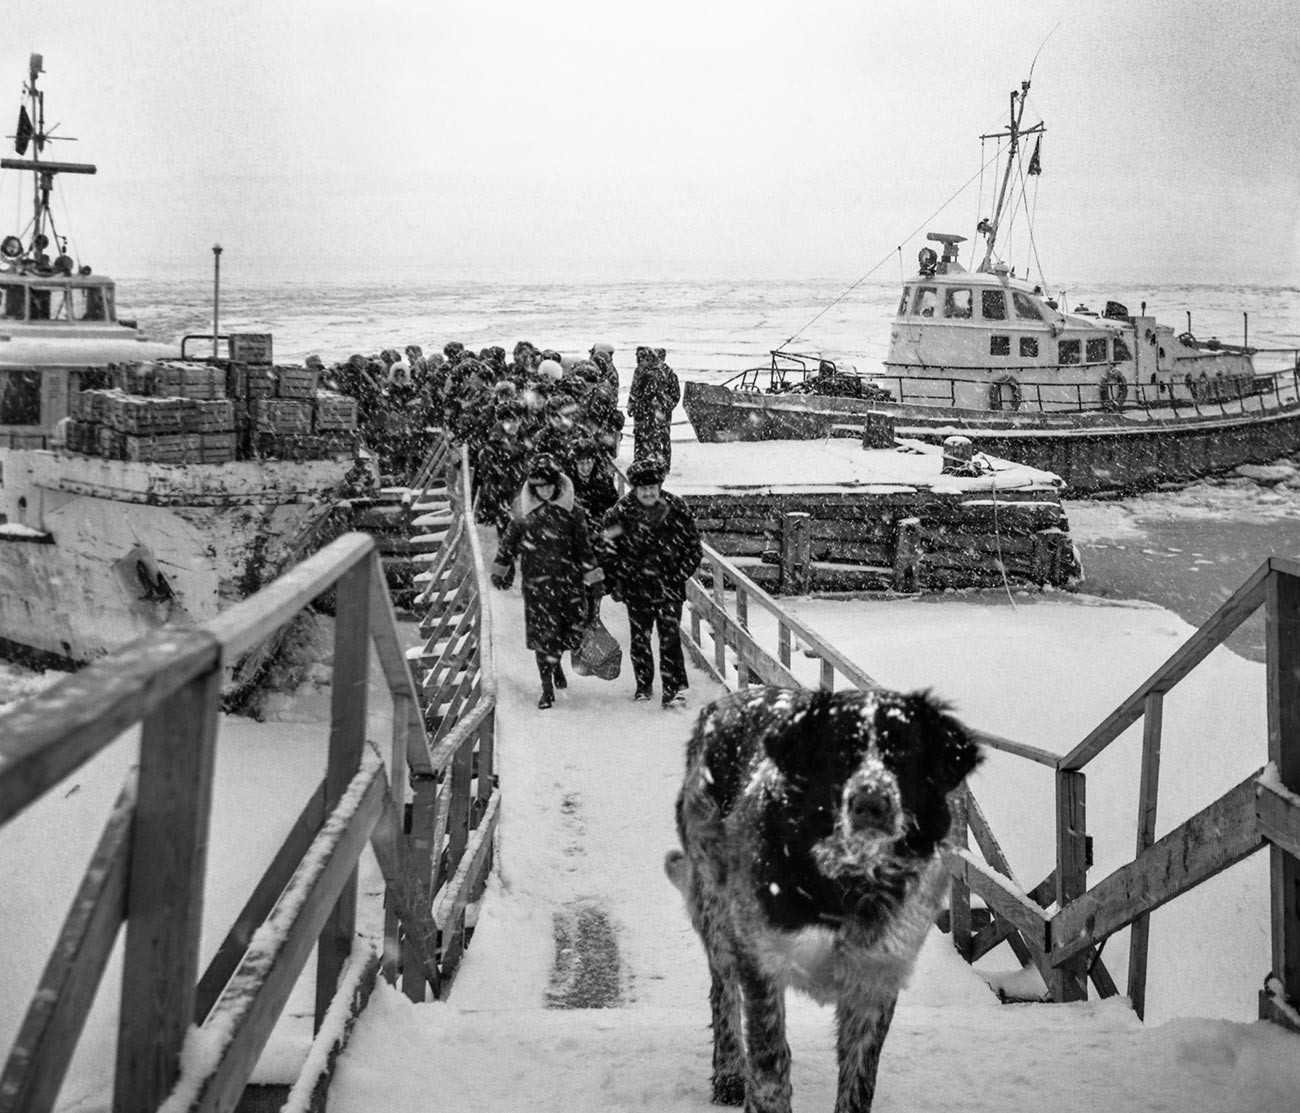 Heavy snowfall in the passenger jetty of the island, Dixon, approximately, September 1980.